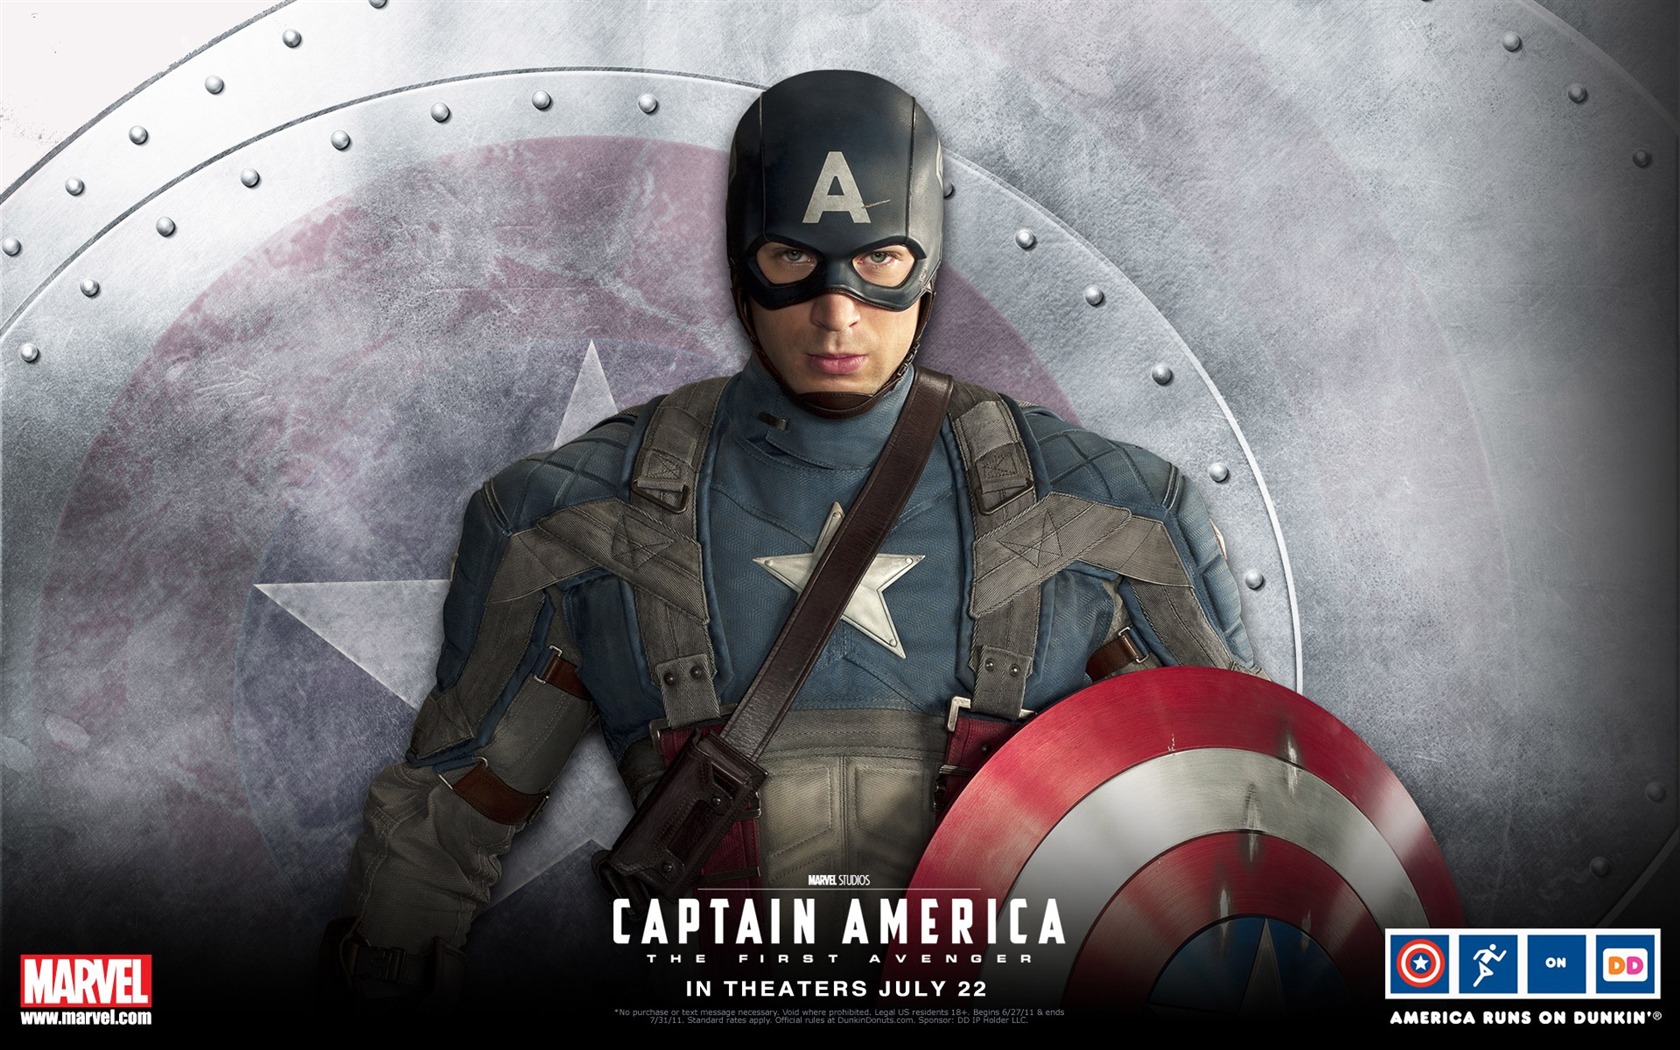 Captain America: The First Avenger wallpapers HD #4 - 1680x1050